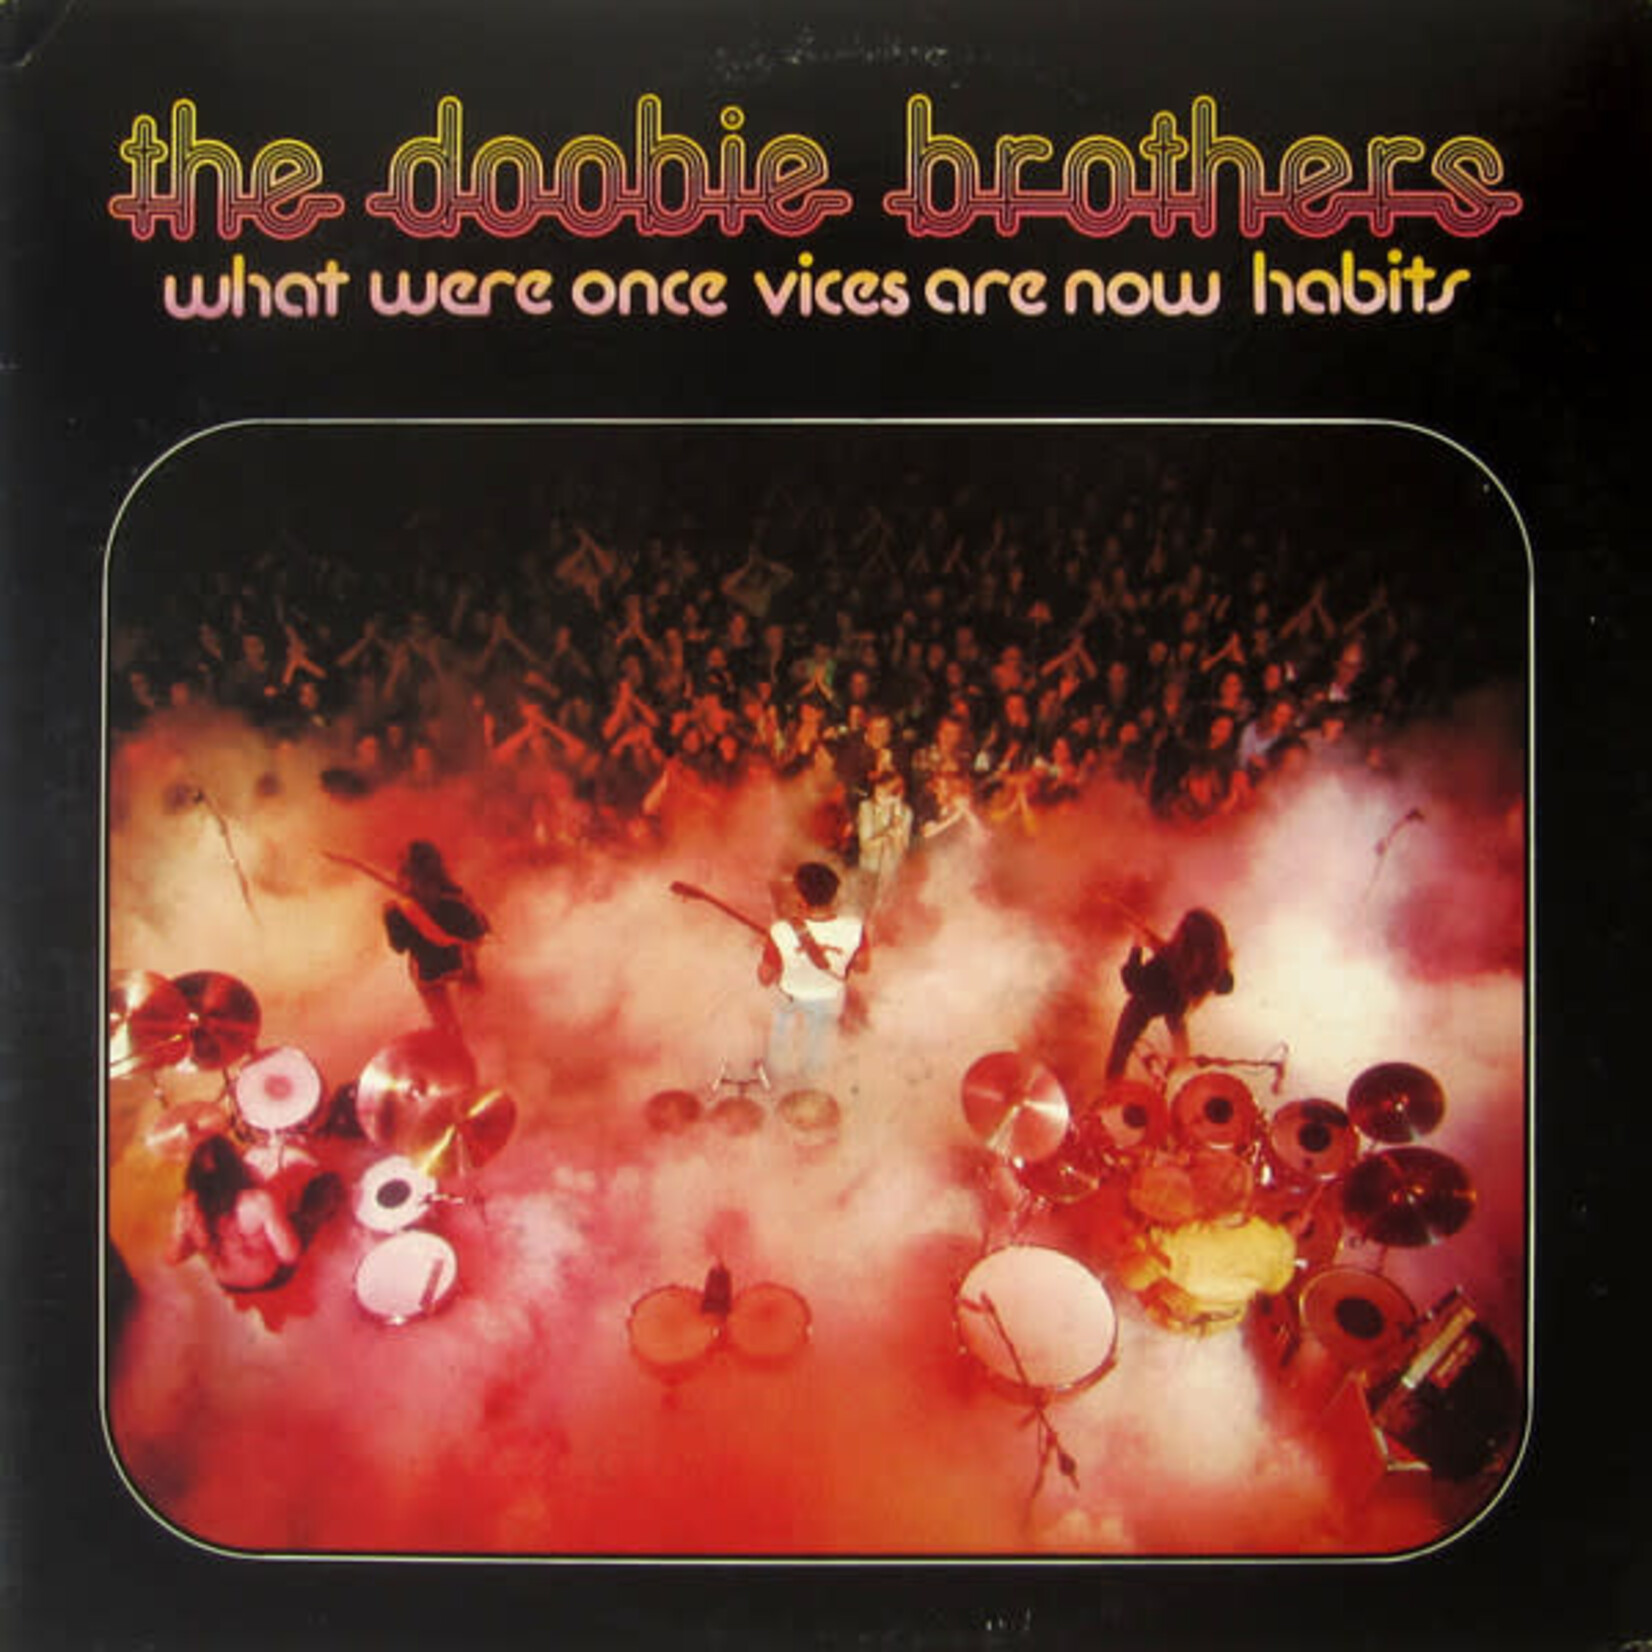 The Doobie Brothers The Doobie Brothers – What Were Once Vices Are Now Habits (VG, 1974, LP, Includes Poster, Warner Bros. Records – W2750, Canada)